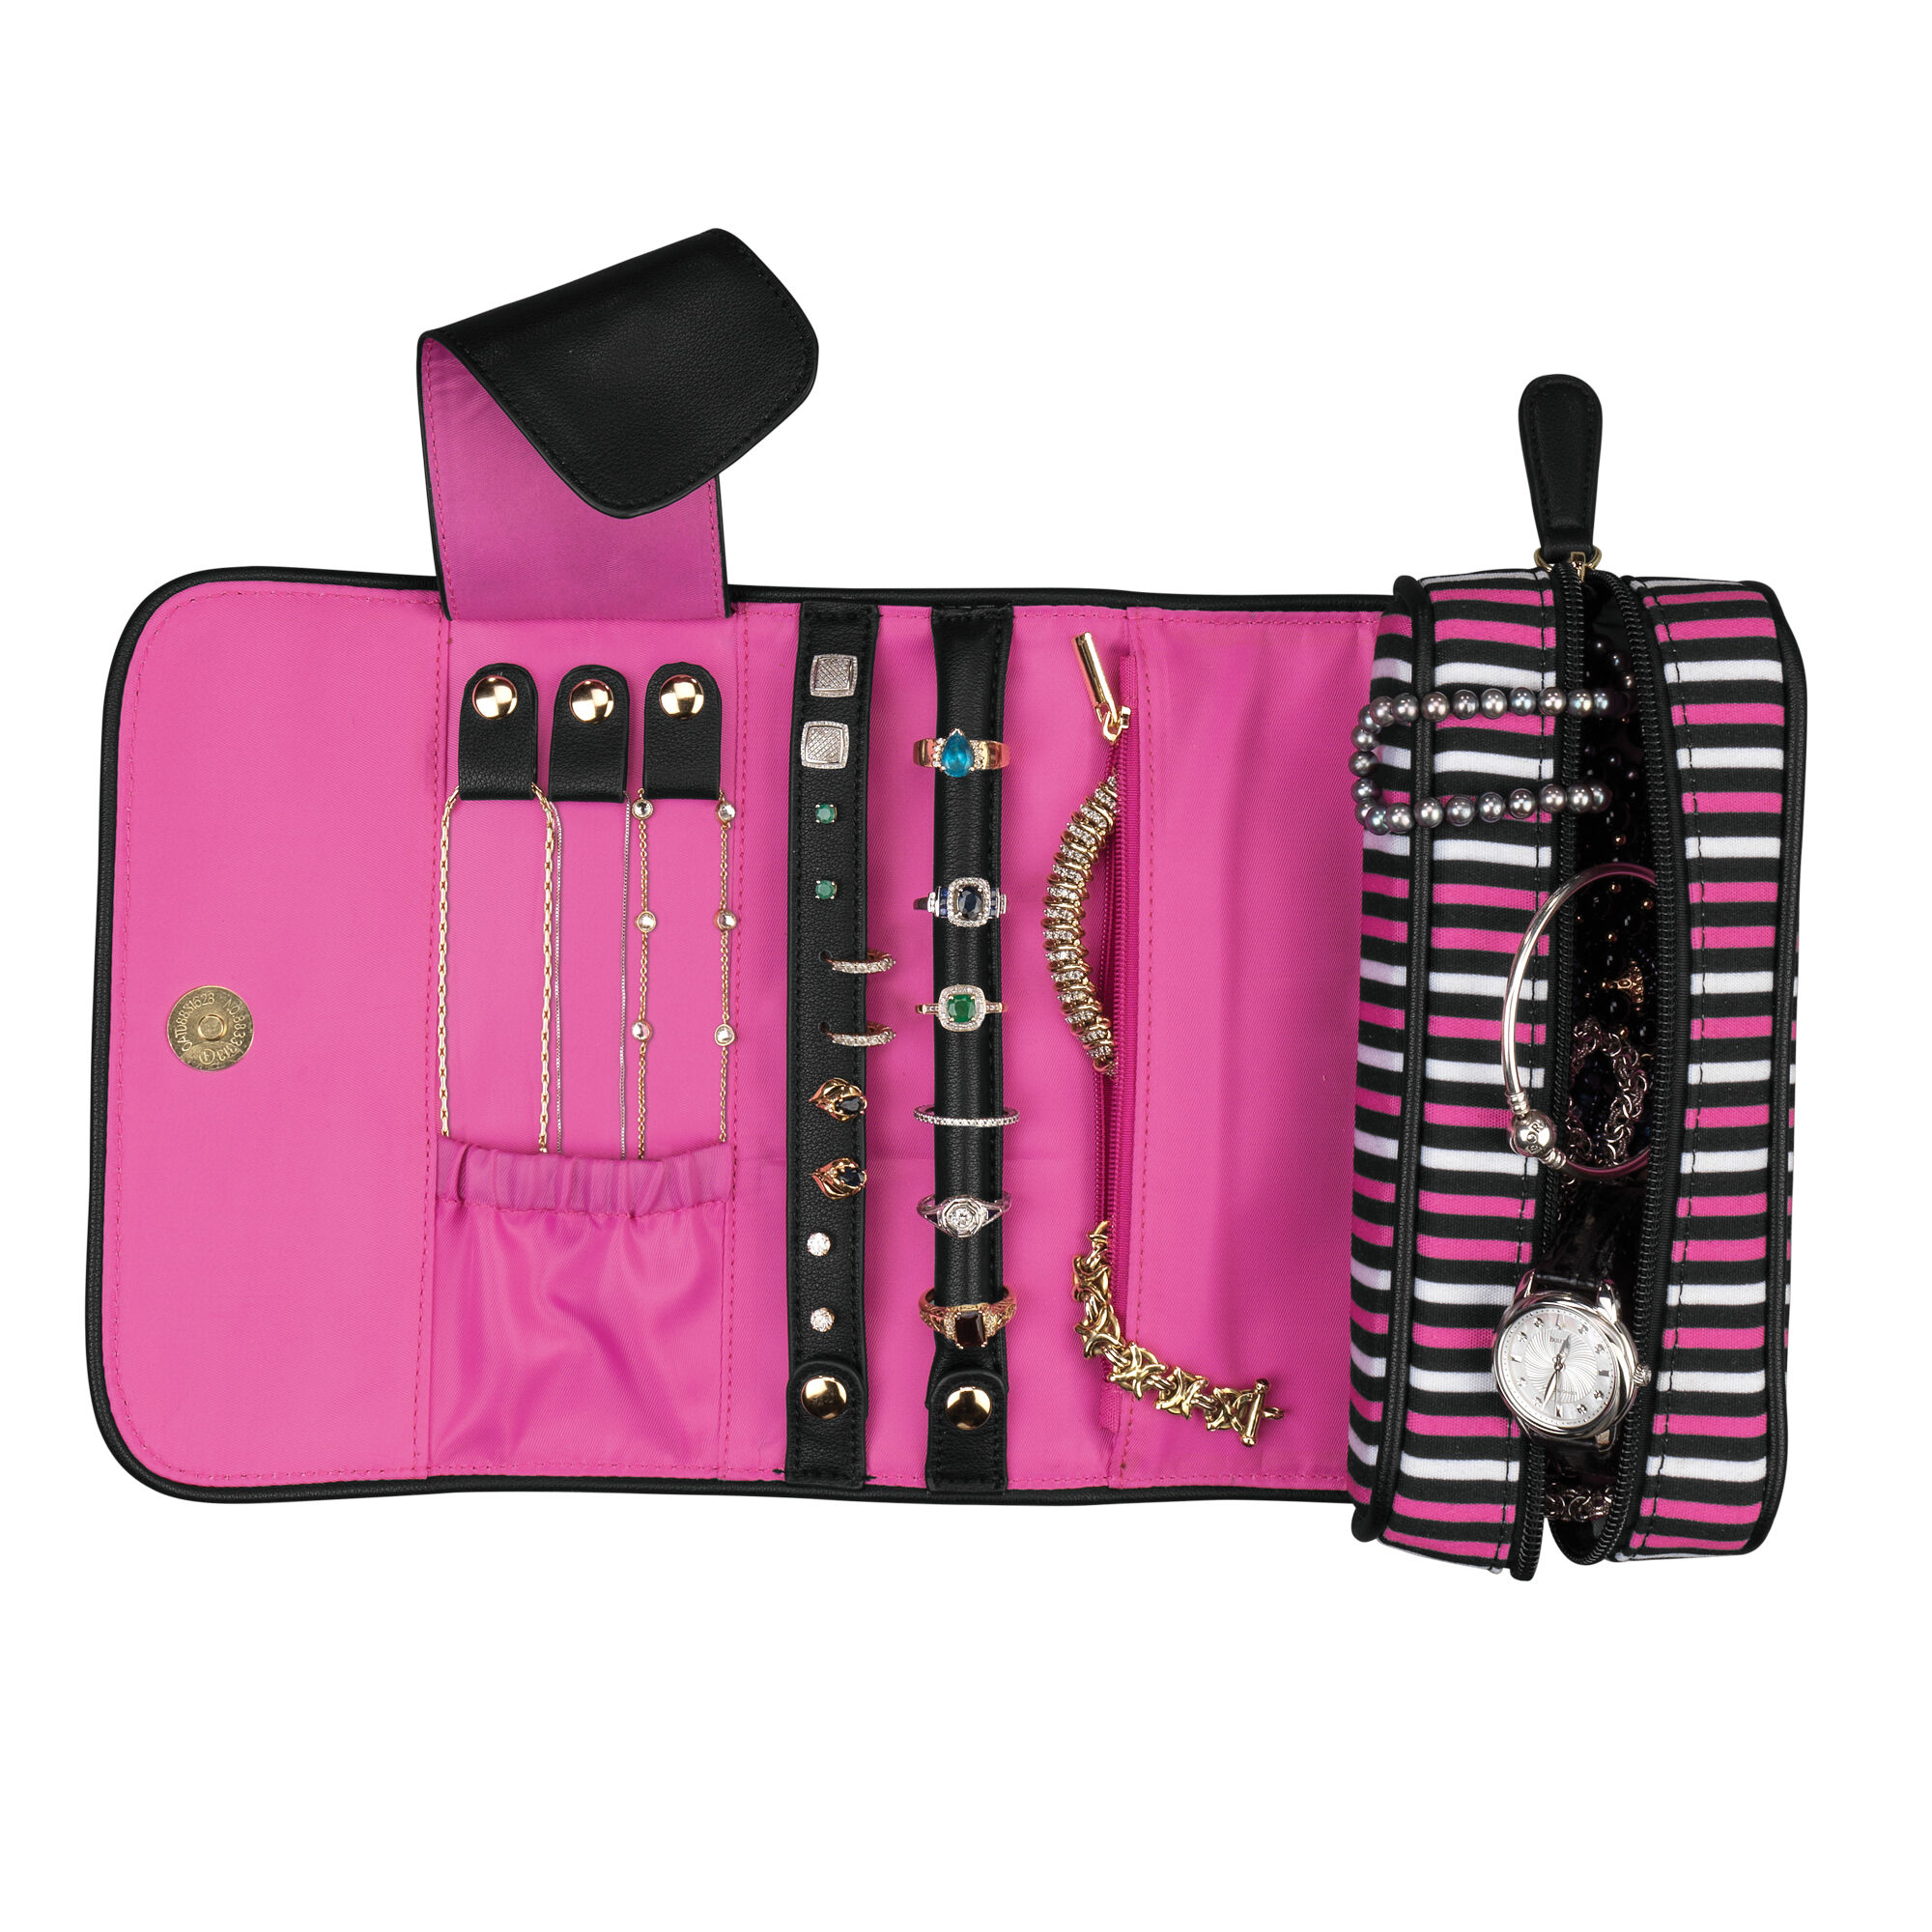 The Personalized Ultimate Travel Set 5548 0016 g walletinisde